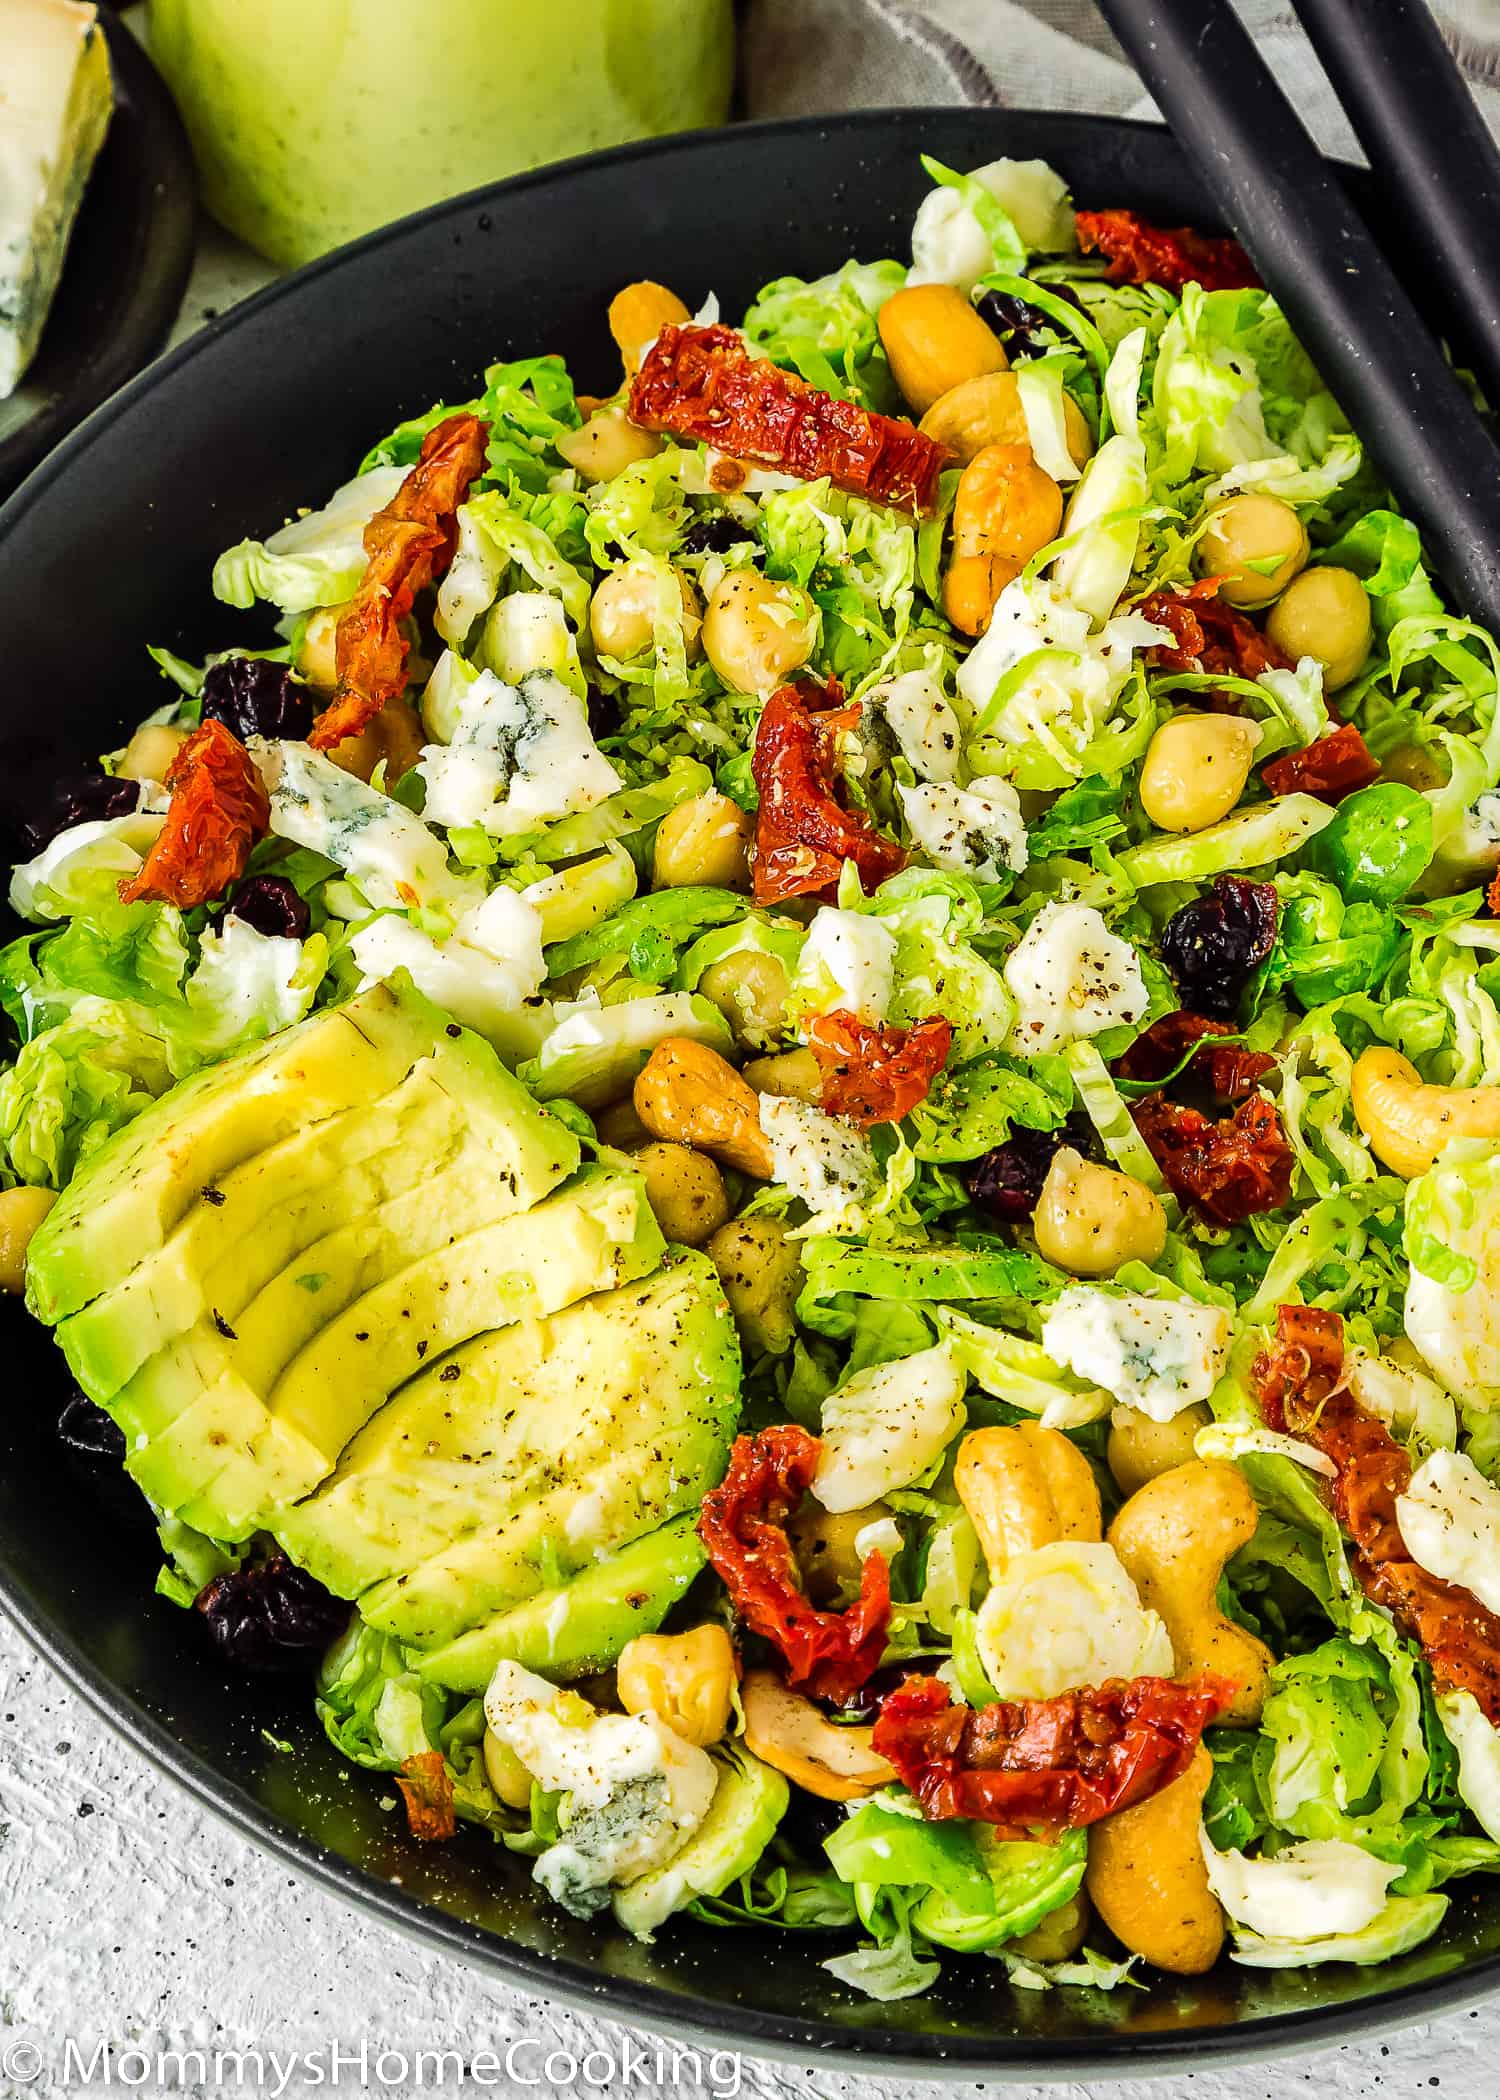 Shaved Brussels Sprout Salad with chickpeas in a salad bowl.